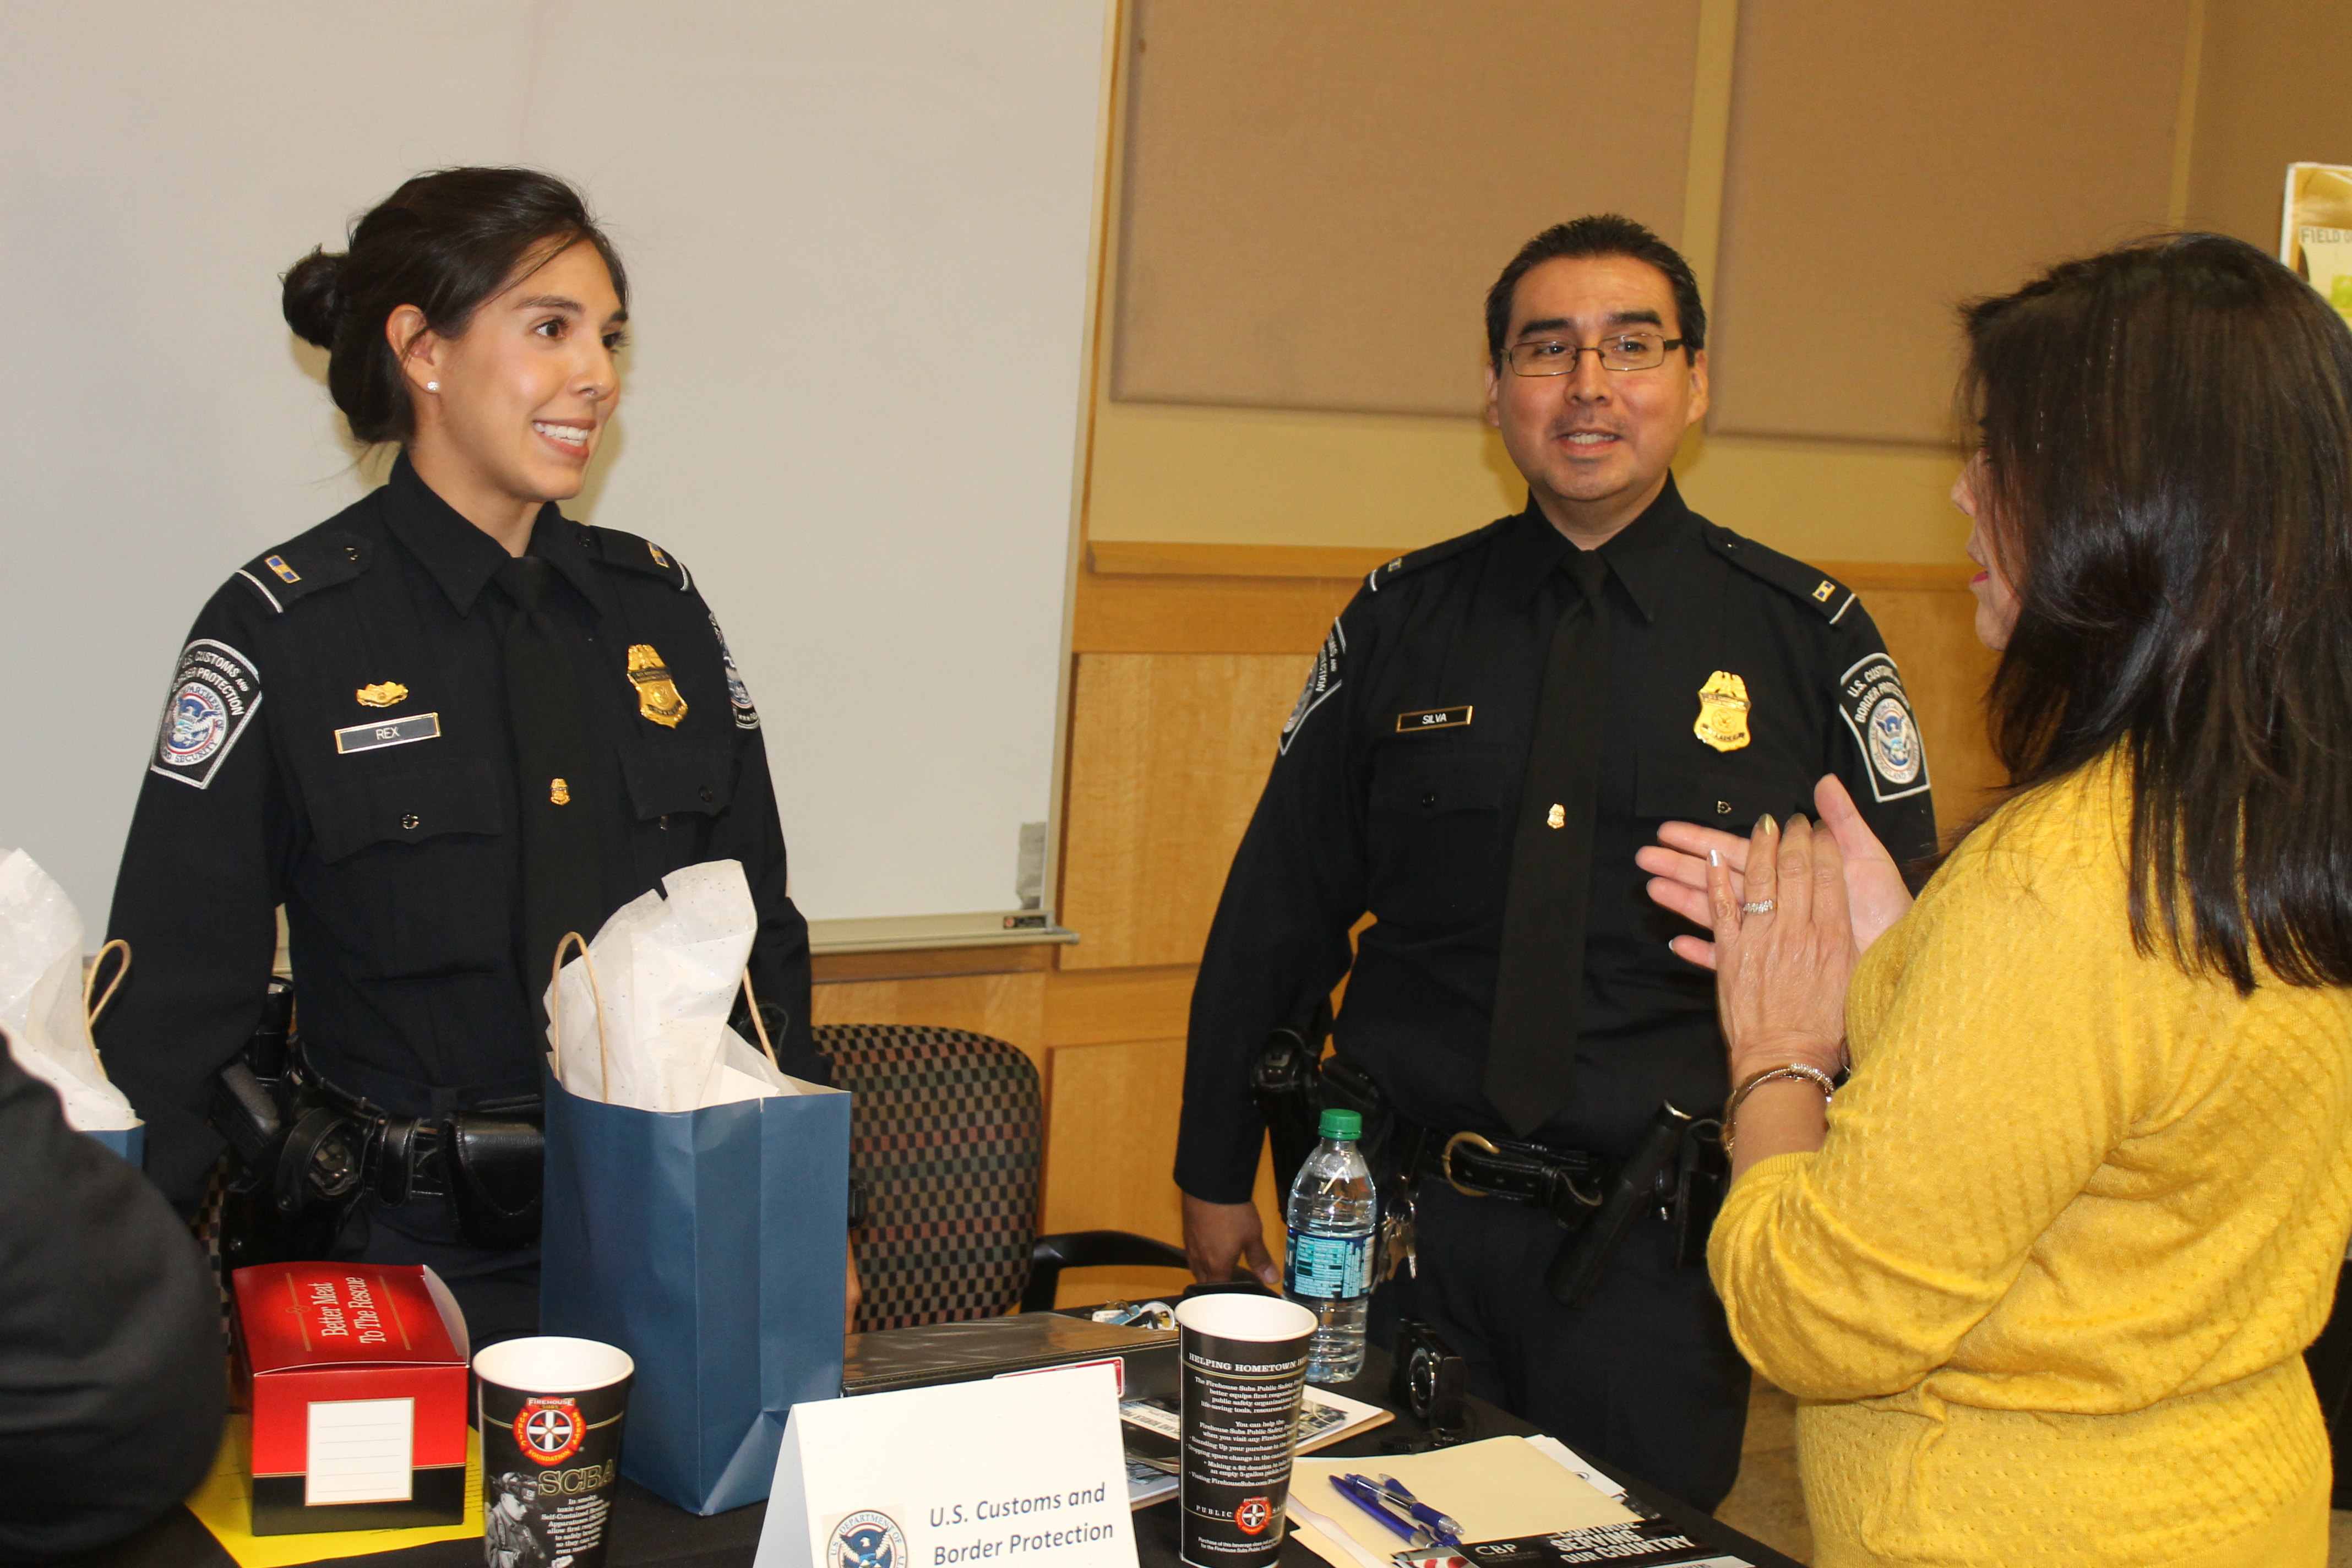 Federal agents visit Del Mar College for recruiting event